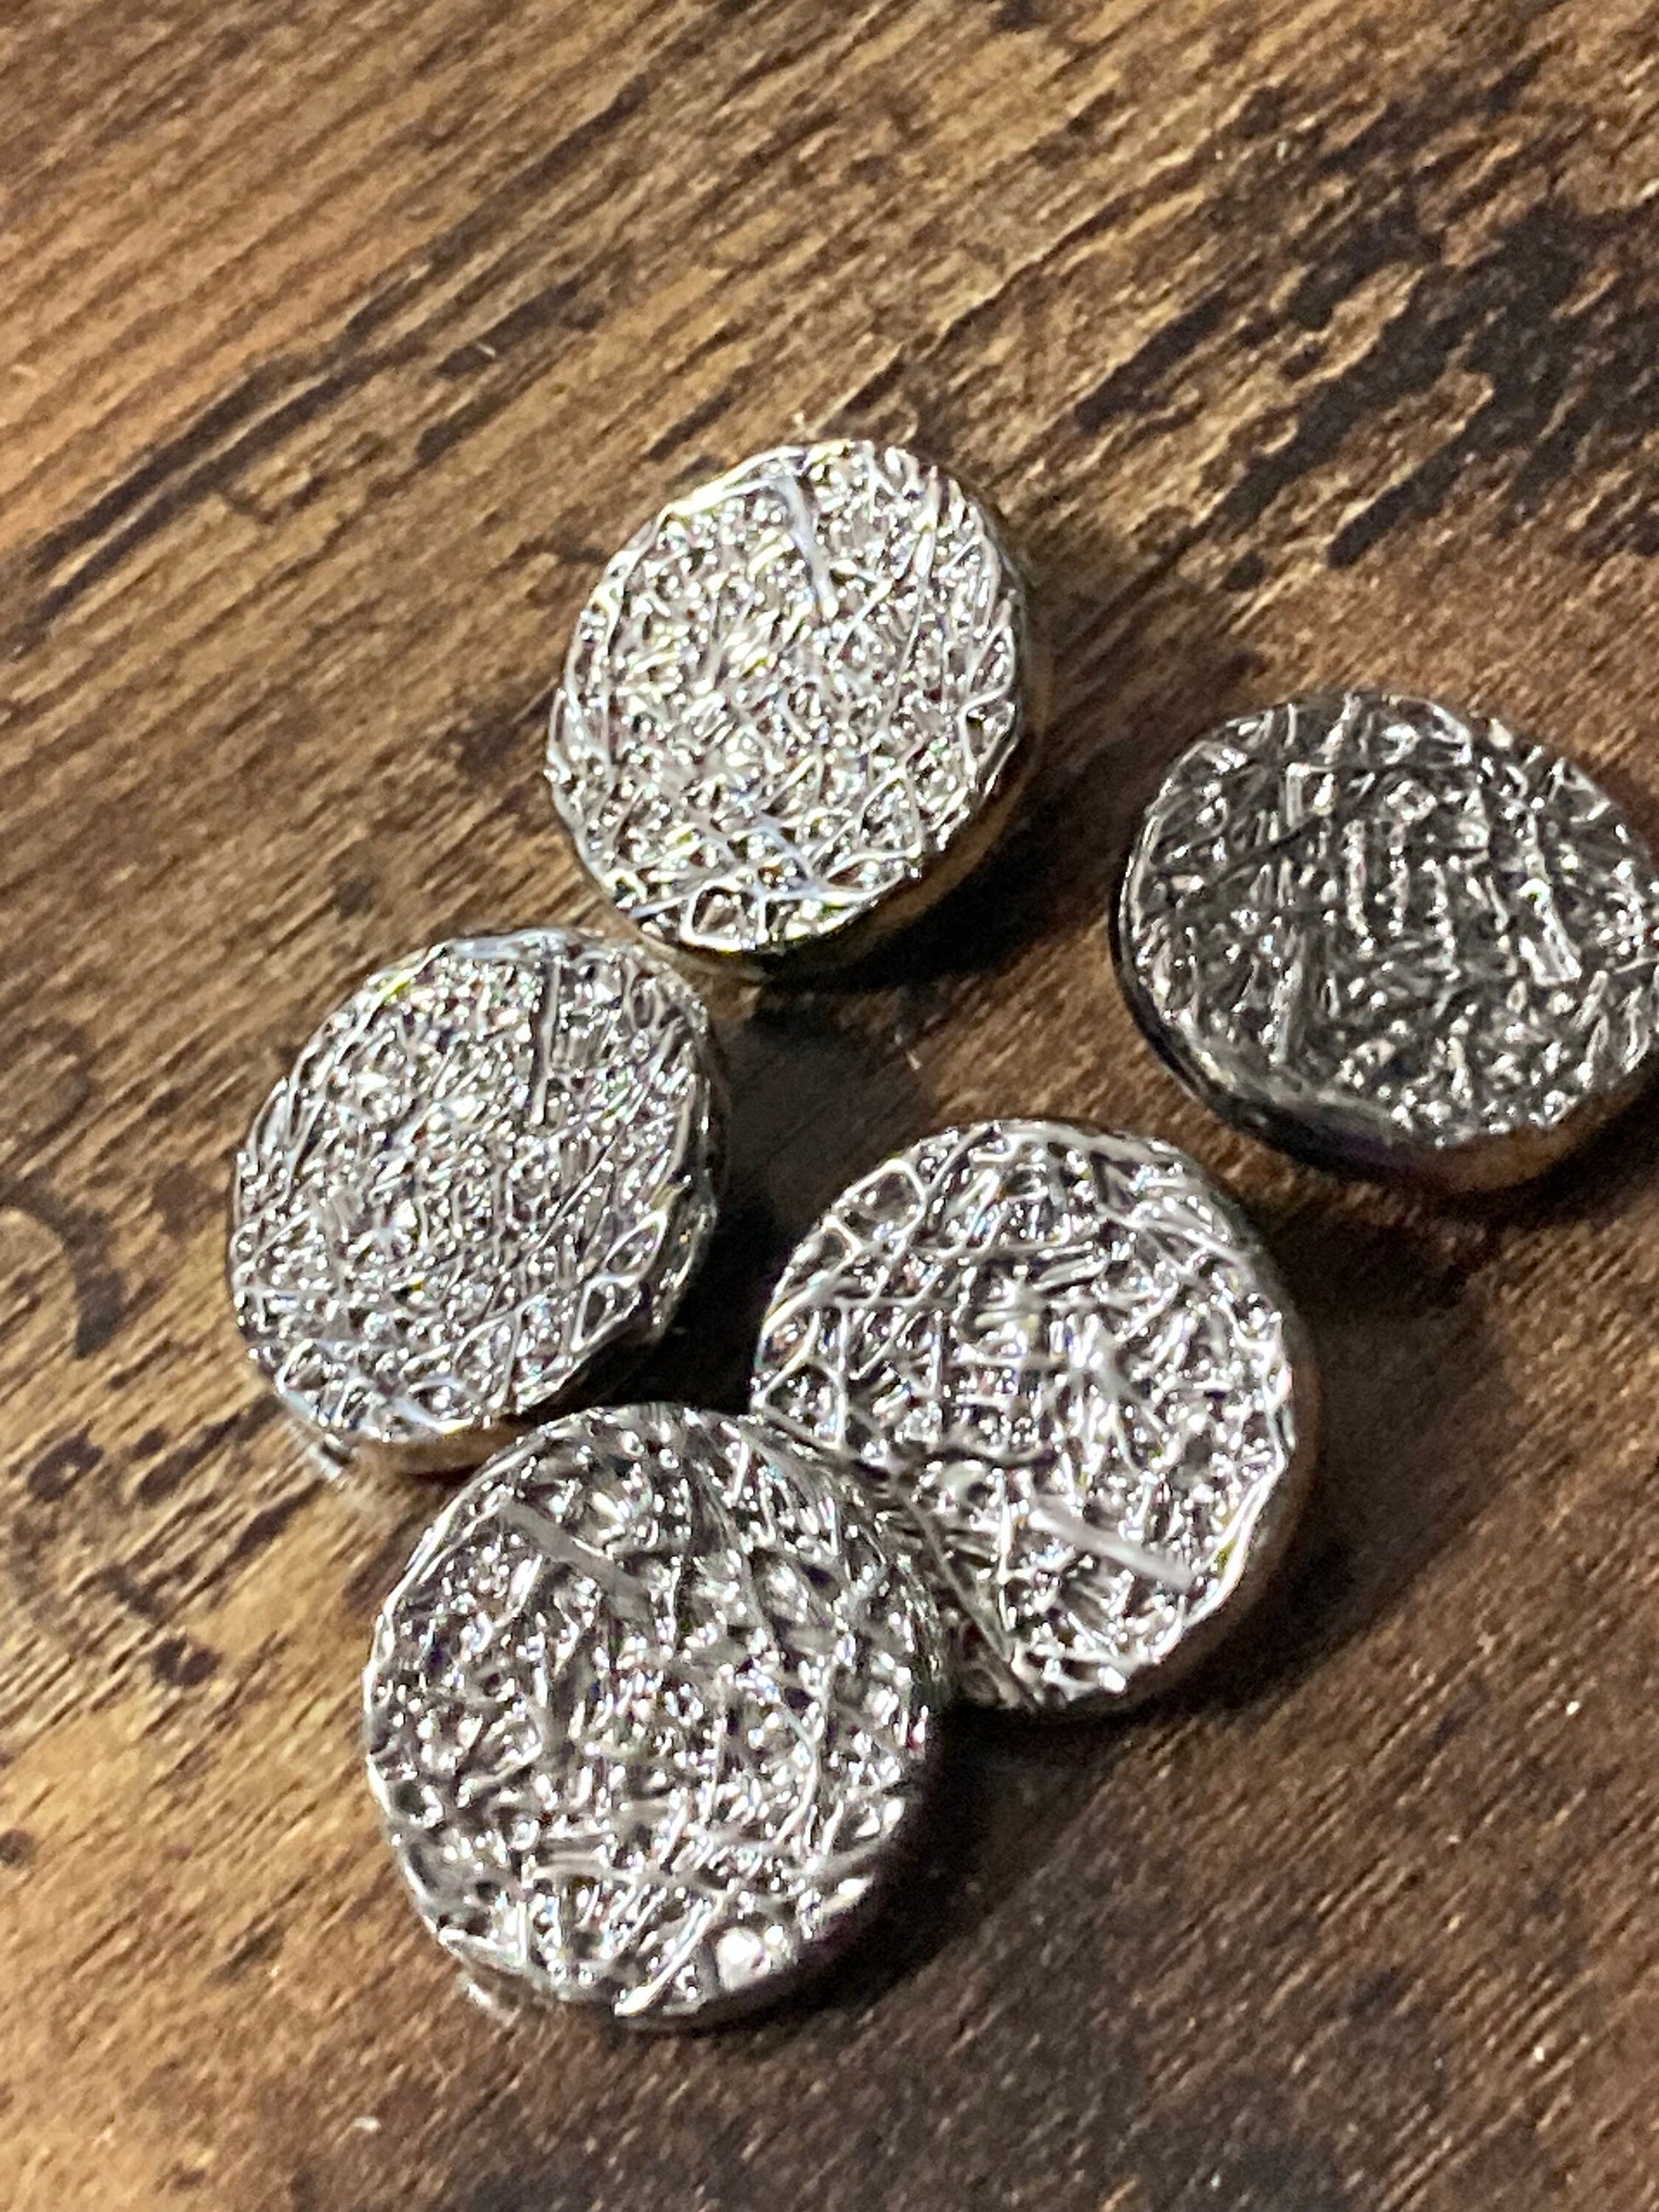 Pack 5 23mm brutalist textured silver tone metal buttons ideal blazer cardigan